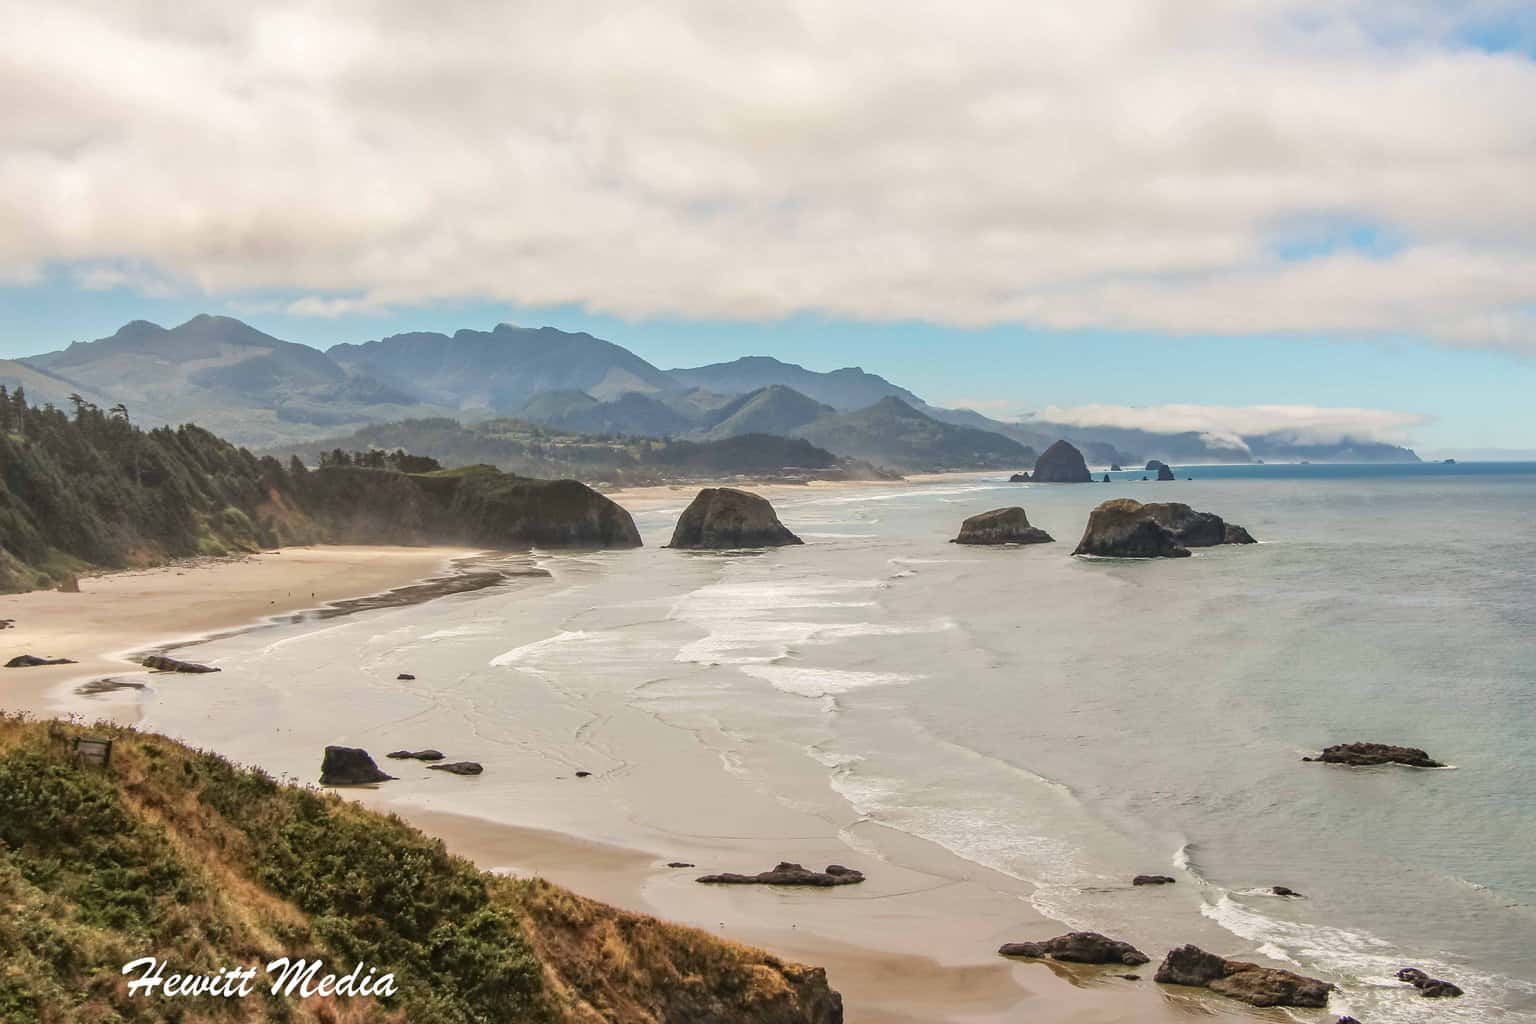 Relive the Movie “The Goonies” Next Time You Visit the Oregon Coast With My Cannon Beach Visitor Guide